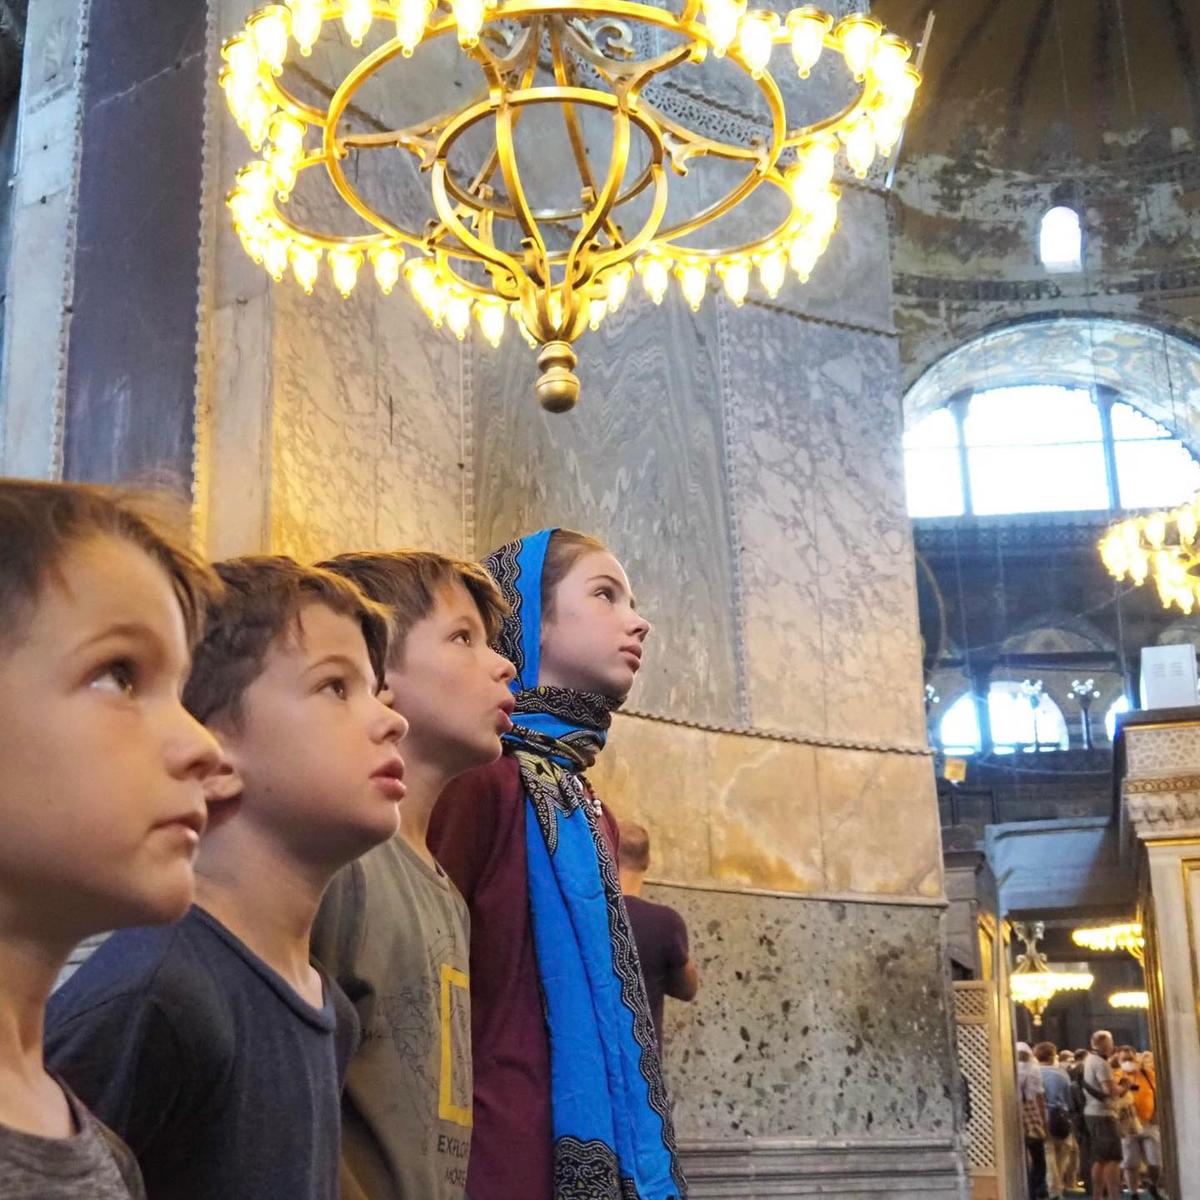 All four children in Istanbul, Turkey. (Courtesy of Edith Lemay)